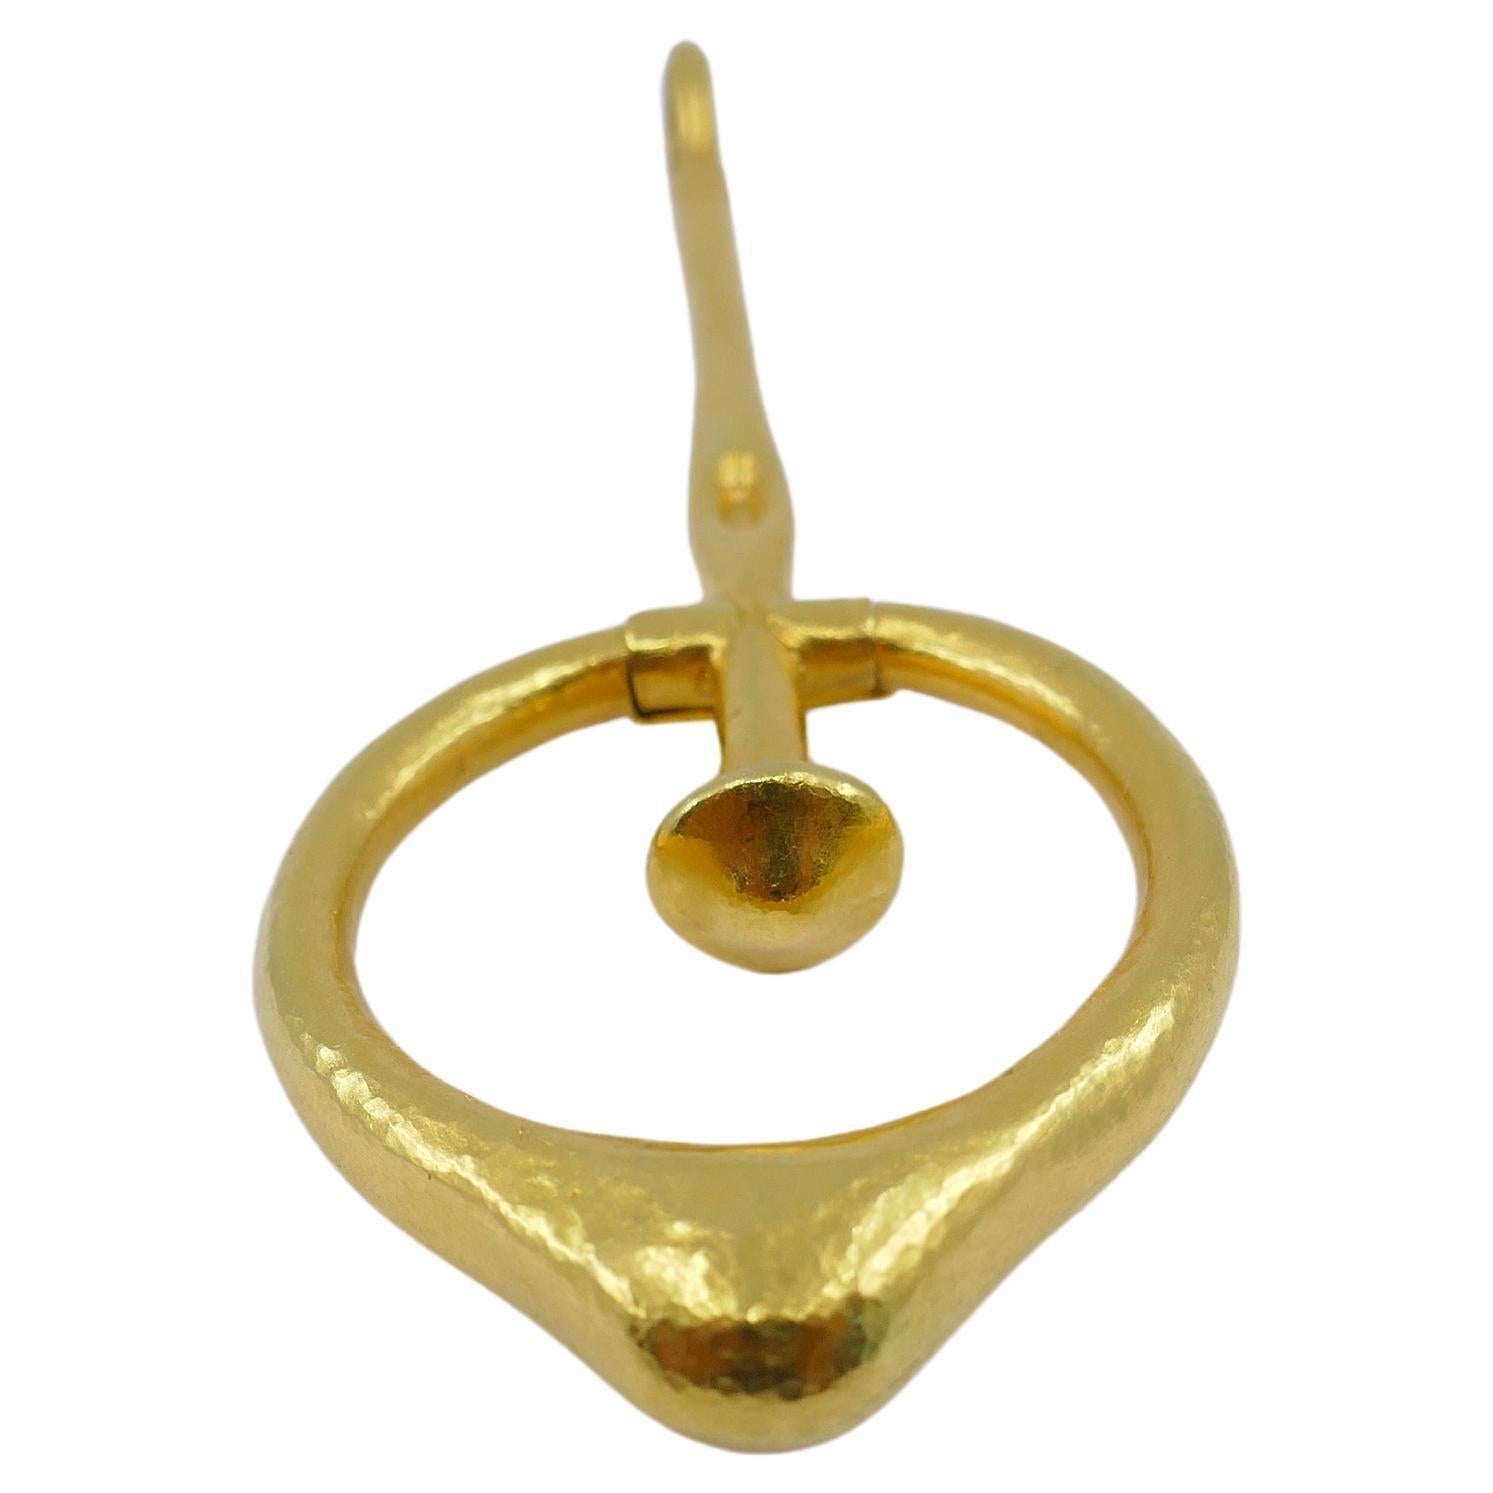 A unique 18k gold pendant by Ilias Lalaounis. The piece is crafted as a pendulum with a dangling, drop-shaped circle part. This Lalaounis pendant can be referred to as one of the ancient pendulums that were worn for protective and luck-providing